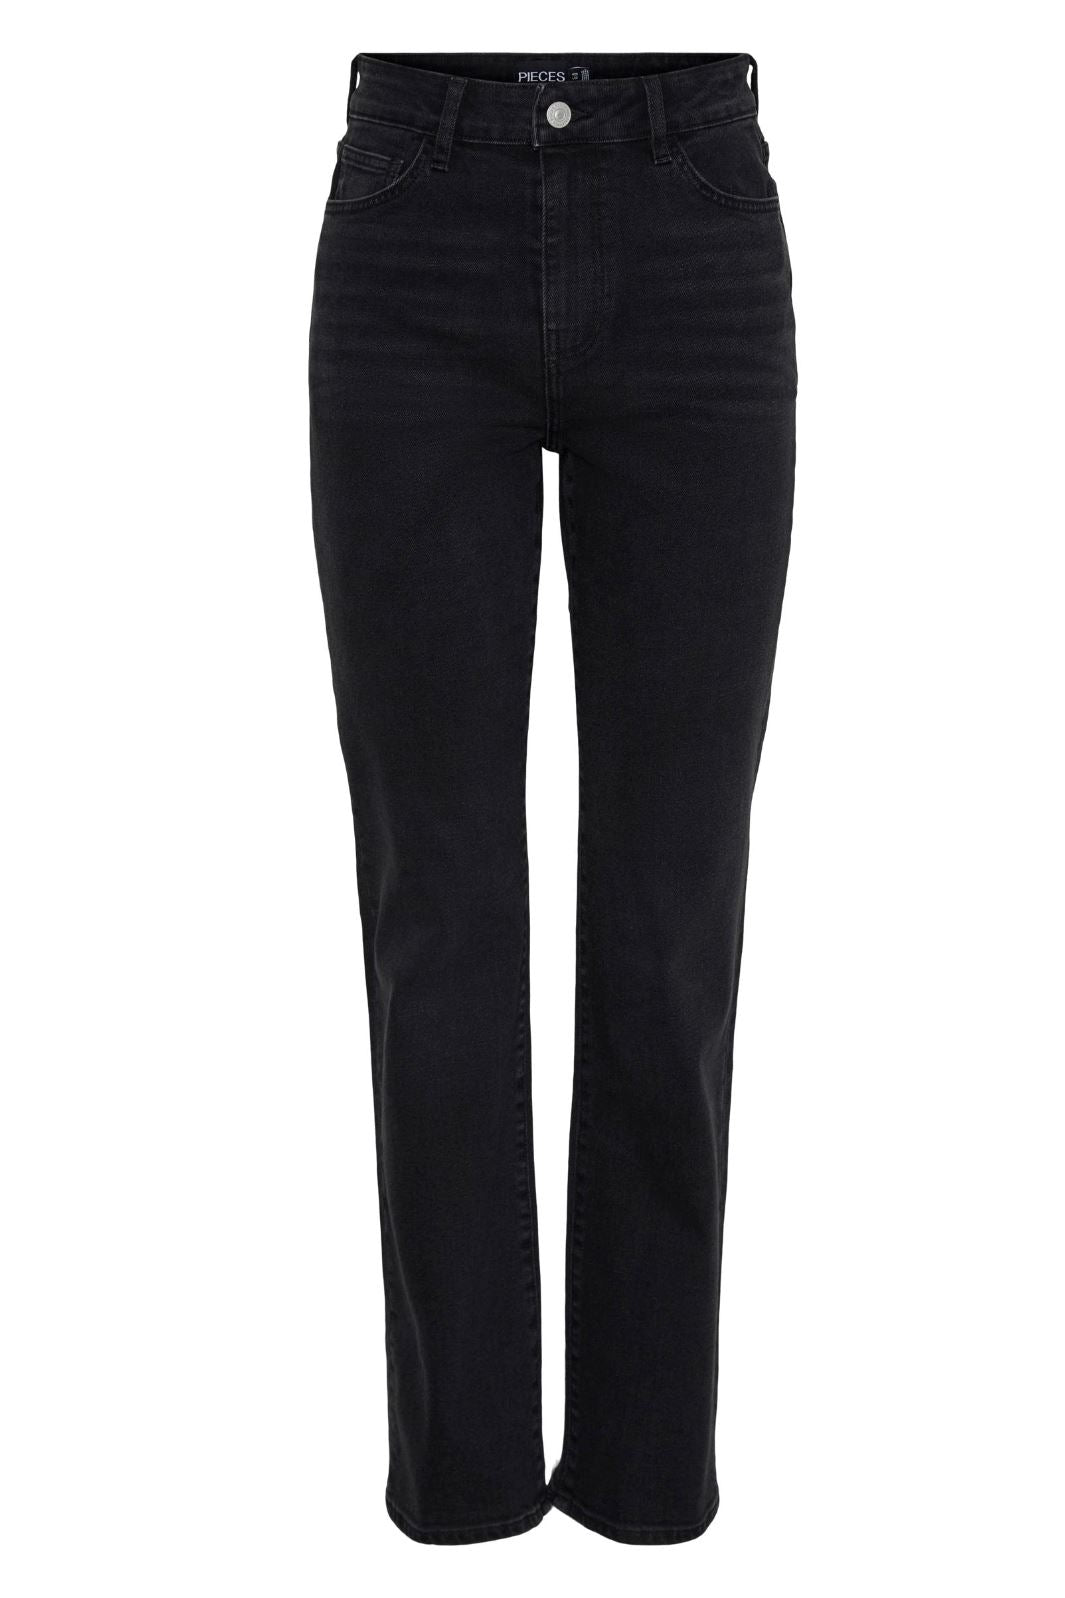 Pieces - Pckelly Straight Jeans Bl102 - 4421715 Black Jeans 